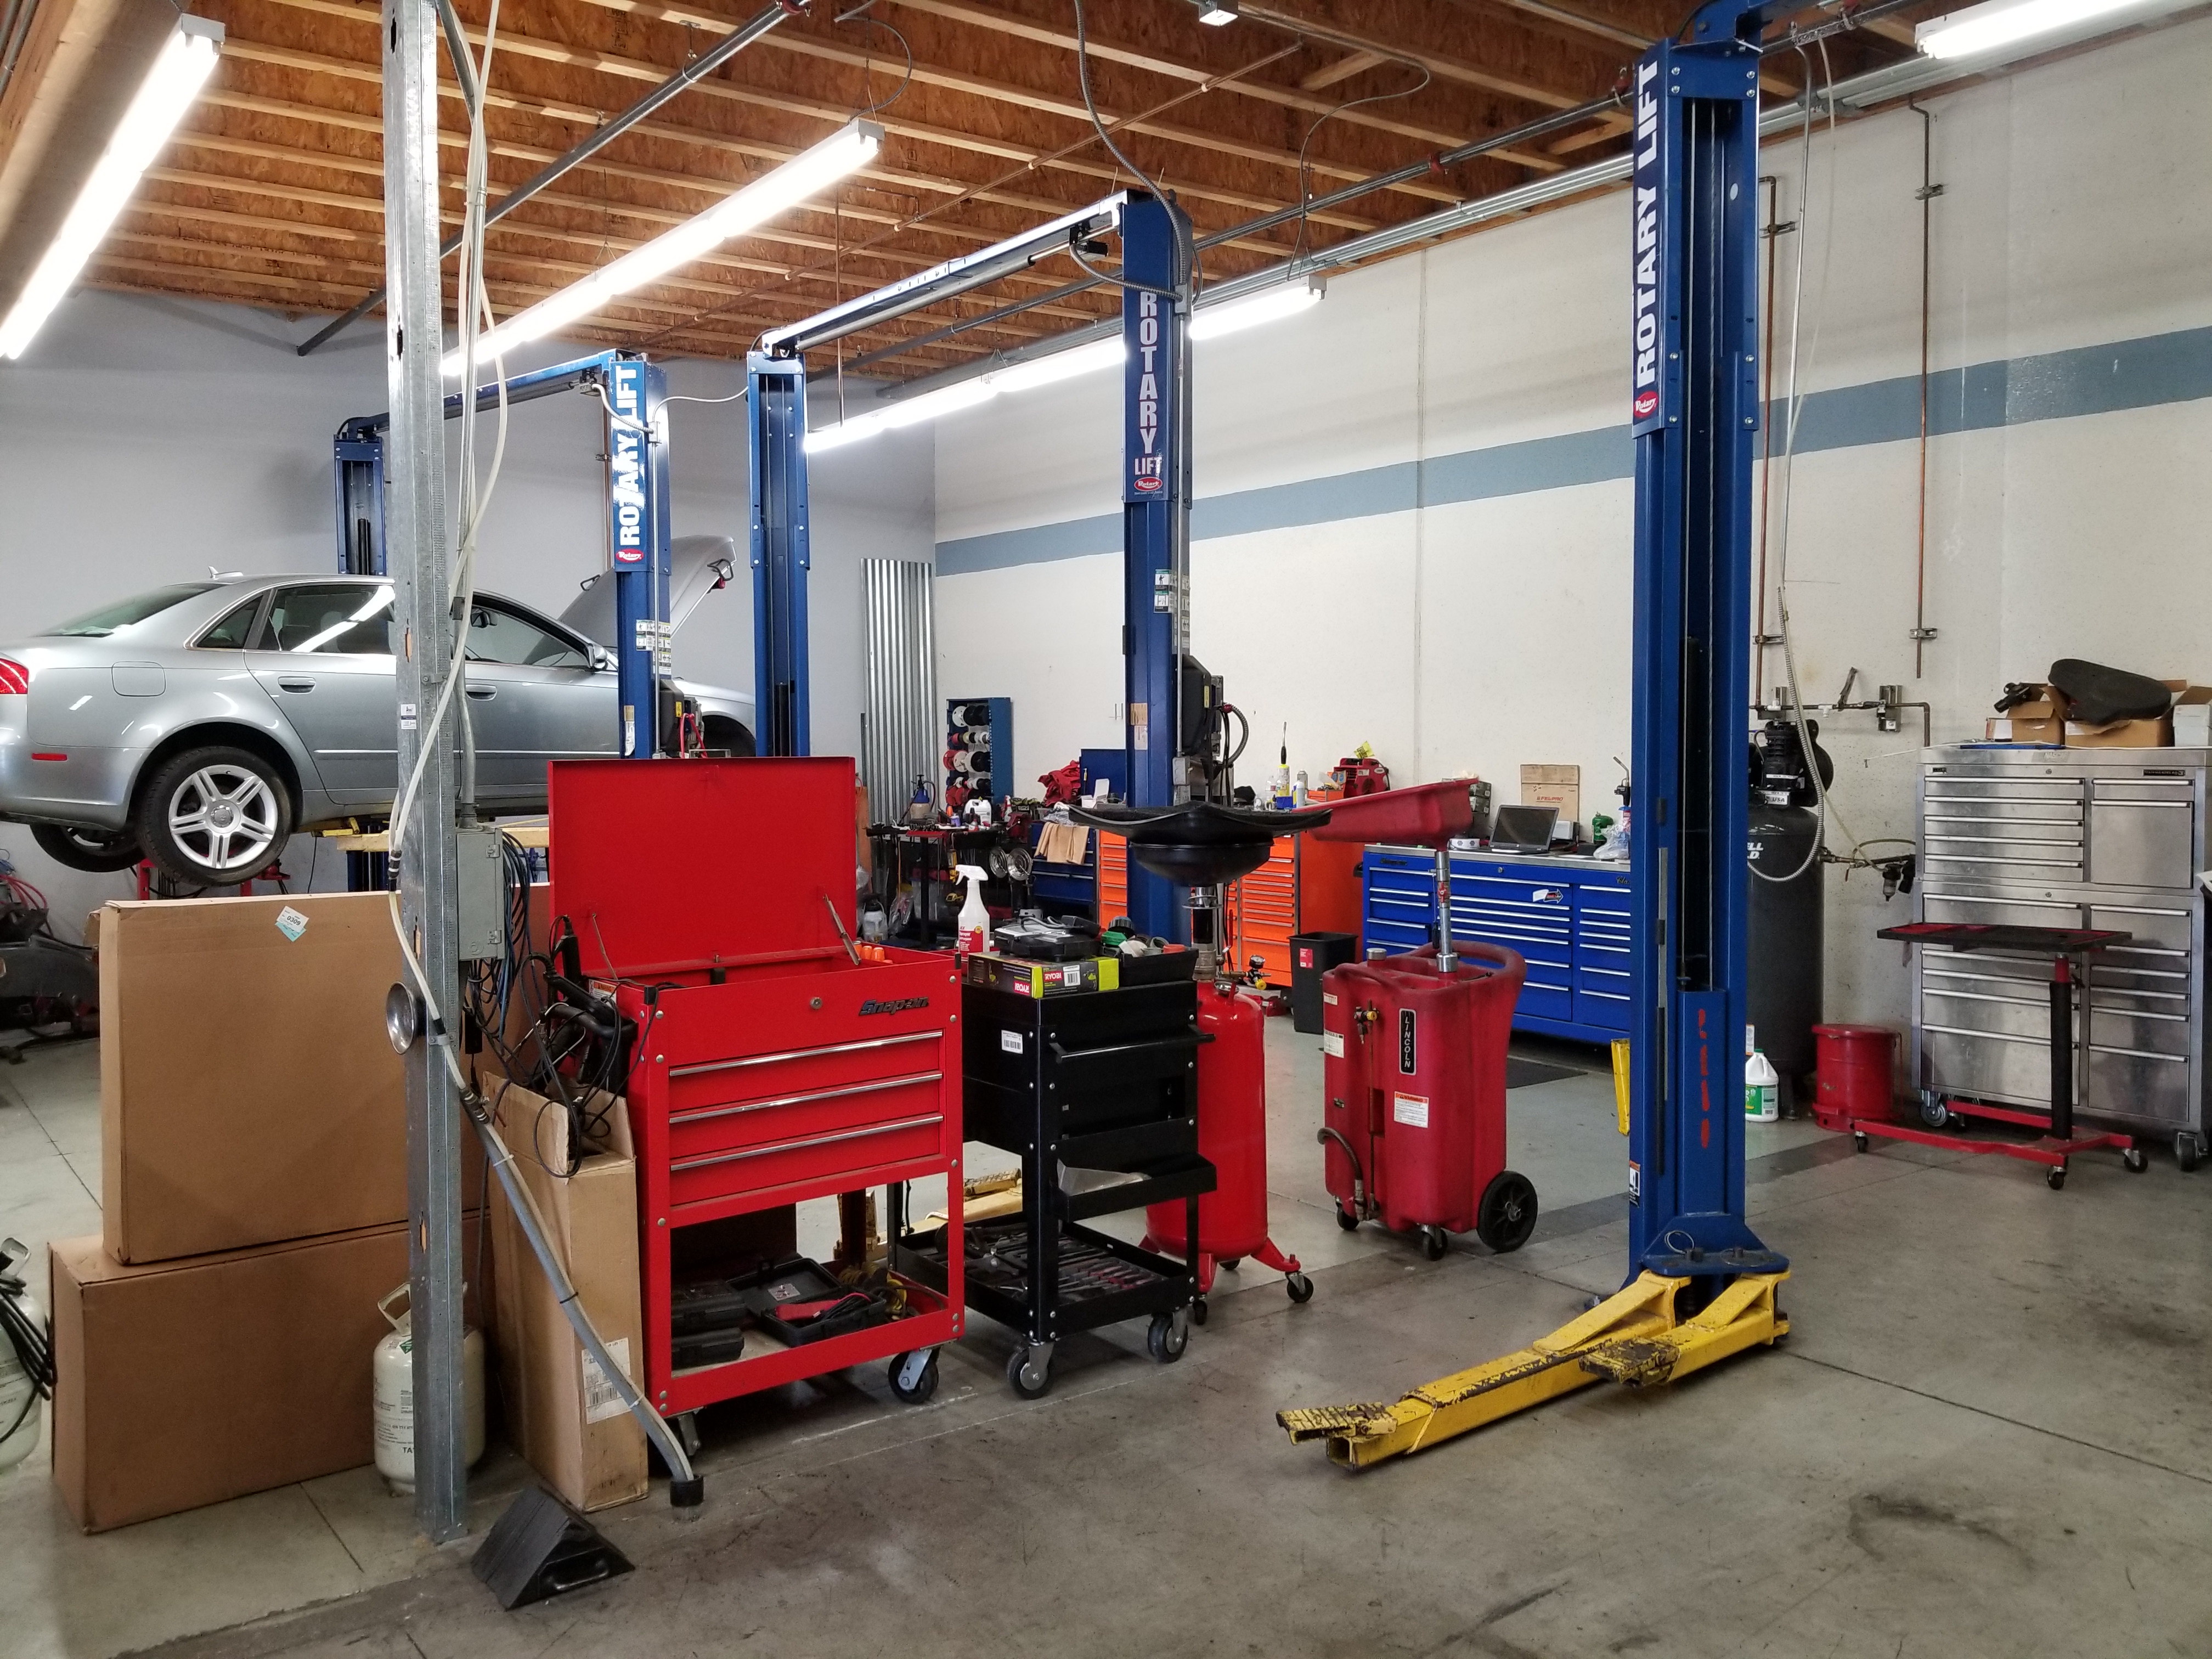 SF Auto Repair Full Services with Growth Potential